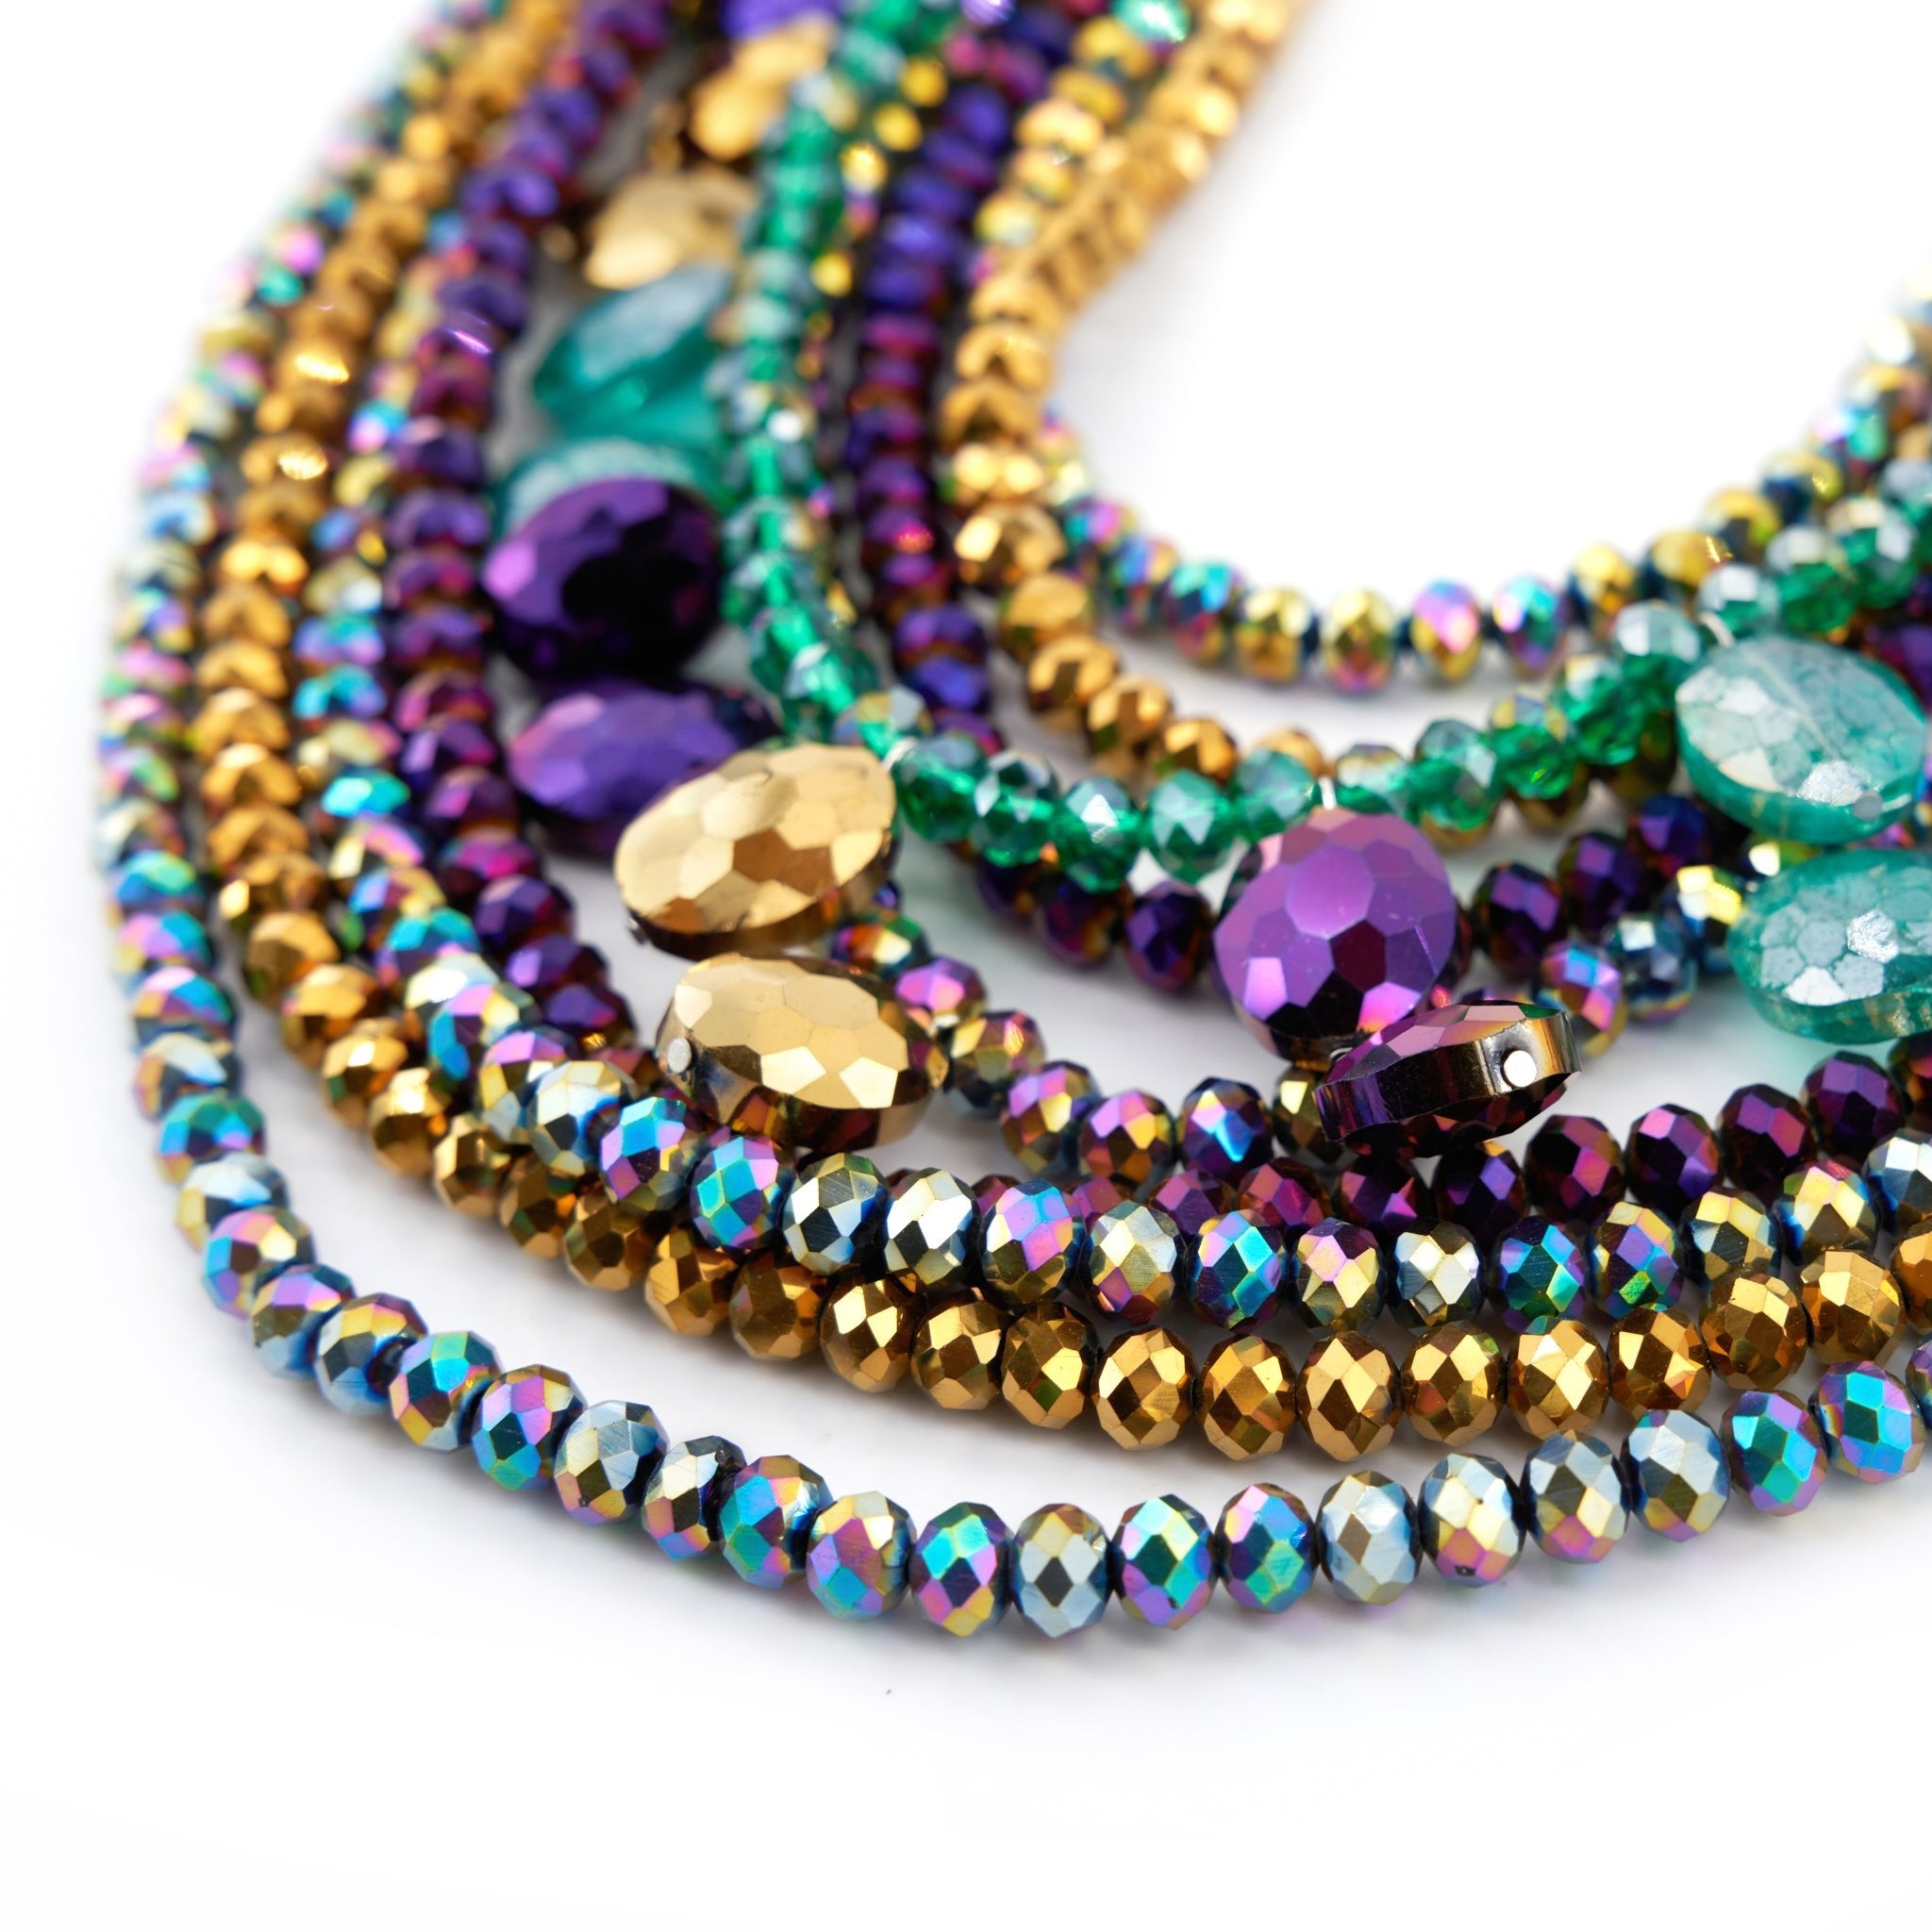 Malia Glass Sparkler - Peacock (Detachable Layers) - Sassy Jones -9-strand design in iridescent purple, teal, and gold hues -4 lower strands are detachable for versatile wear -Hand-strung faceted glass AB beads  -Dangling larger glass pendants on 2 strands  -Collar length -Silver metal hardware 